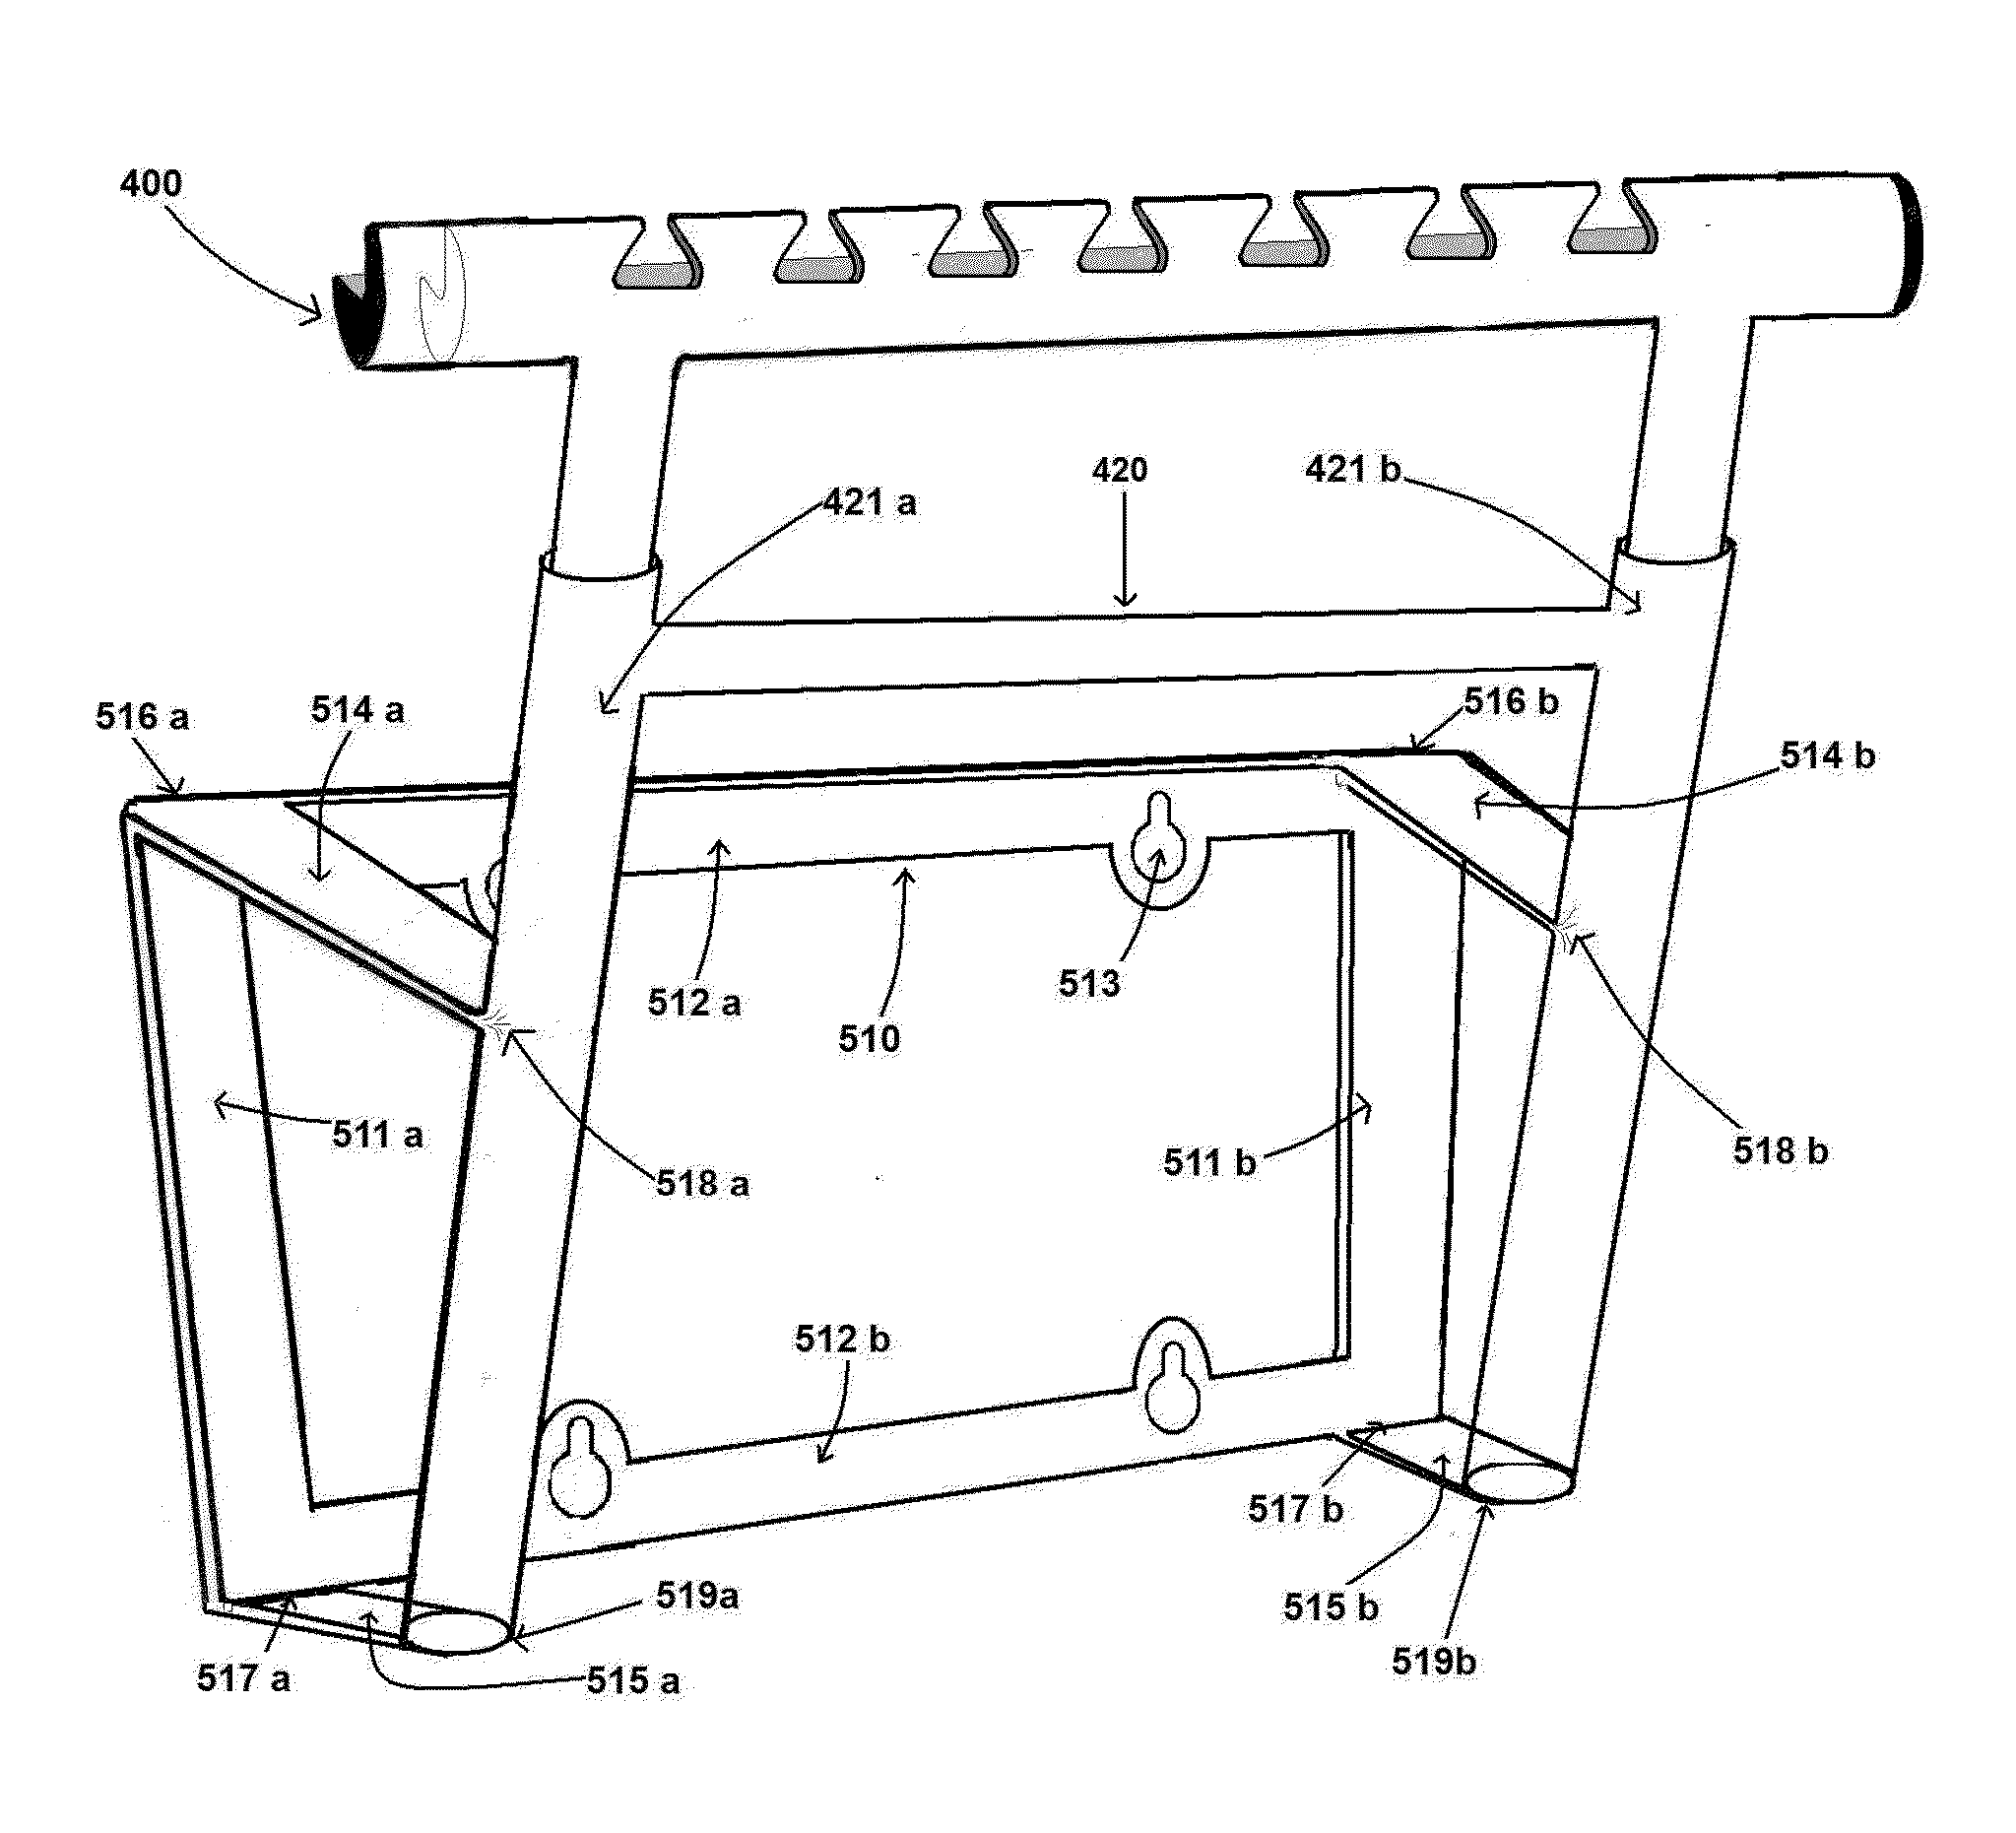 Portable carrier for holding bags or holding displays on vehicles